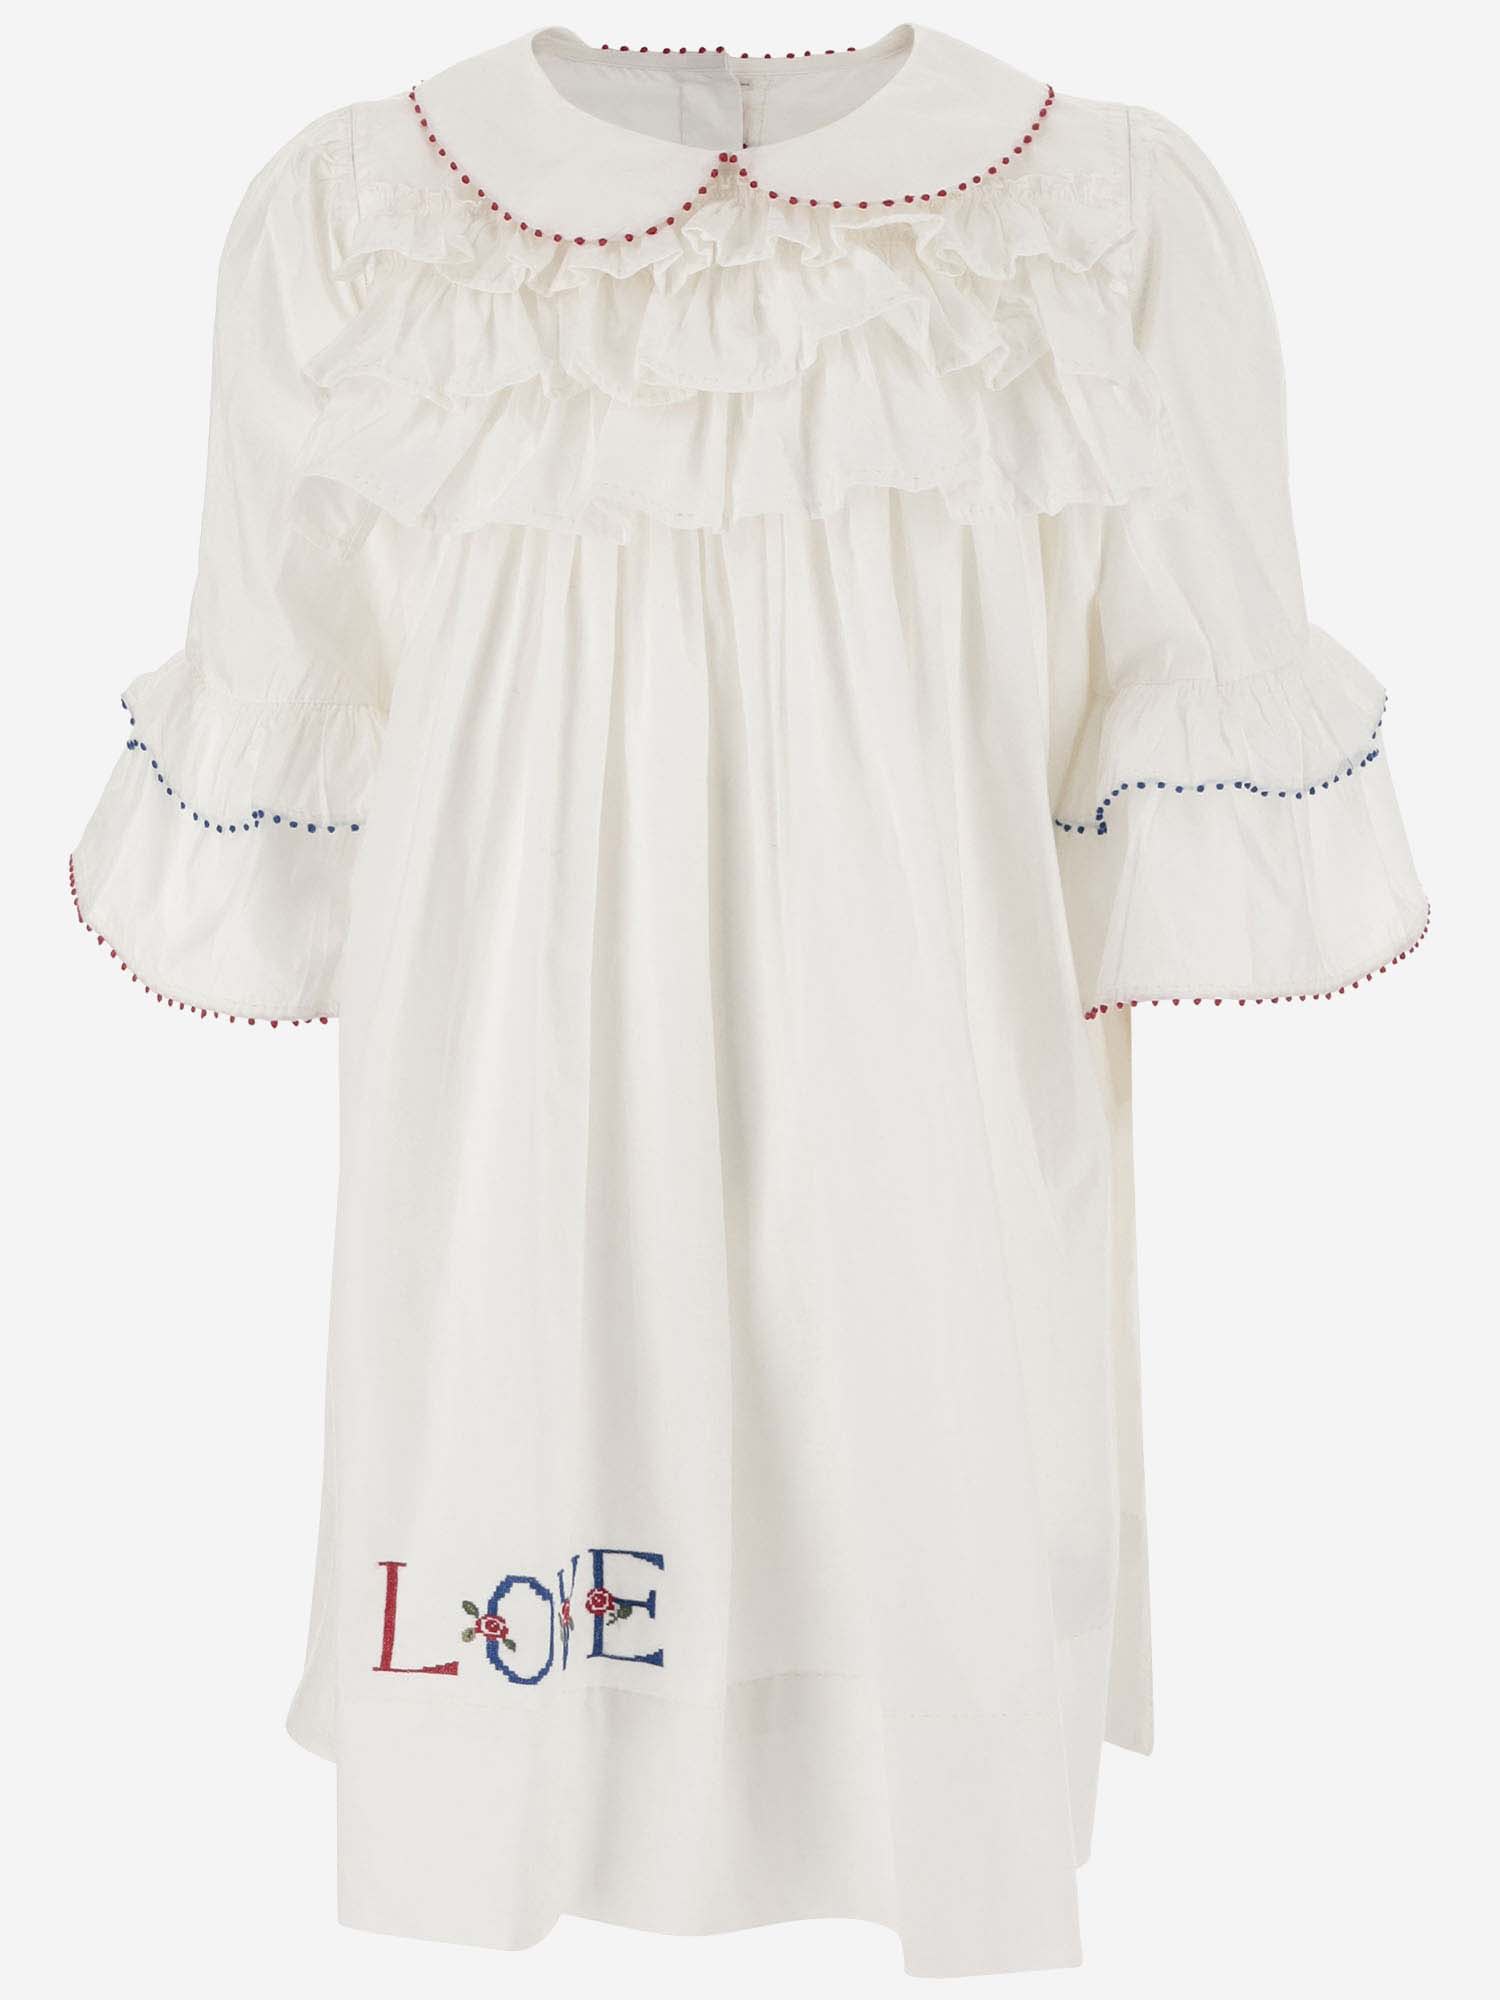 Péro Kids' Cotton Dress With Embroidery In White